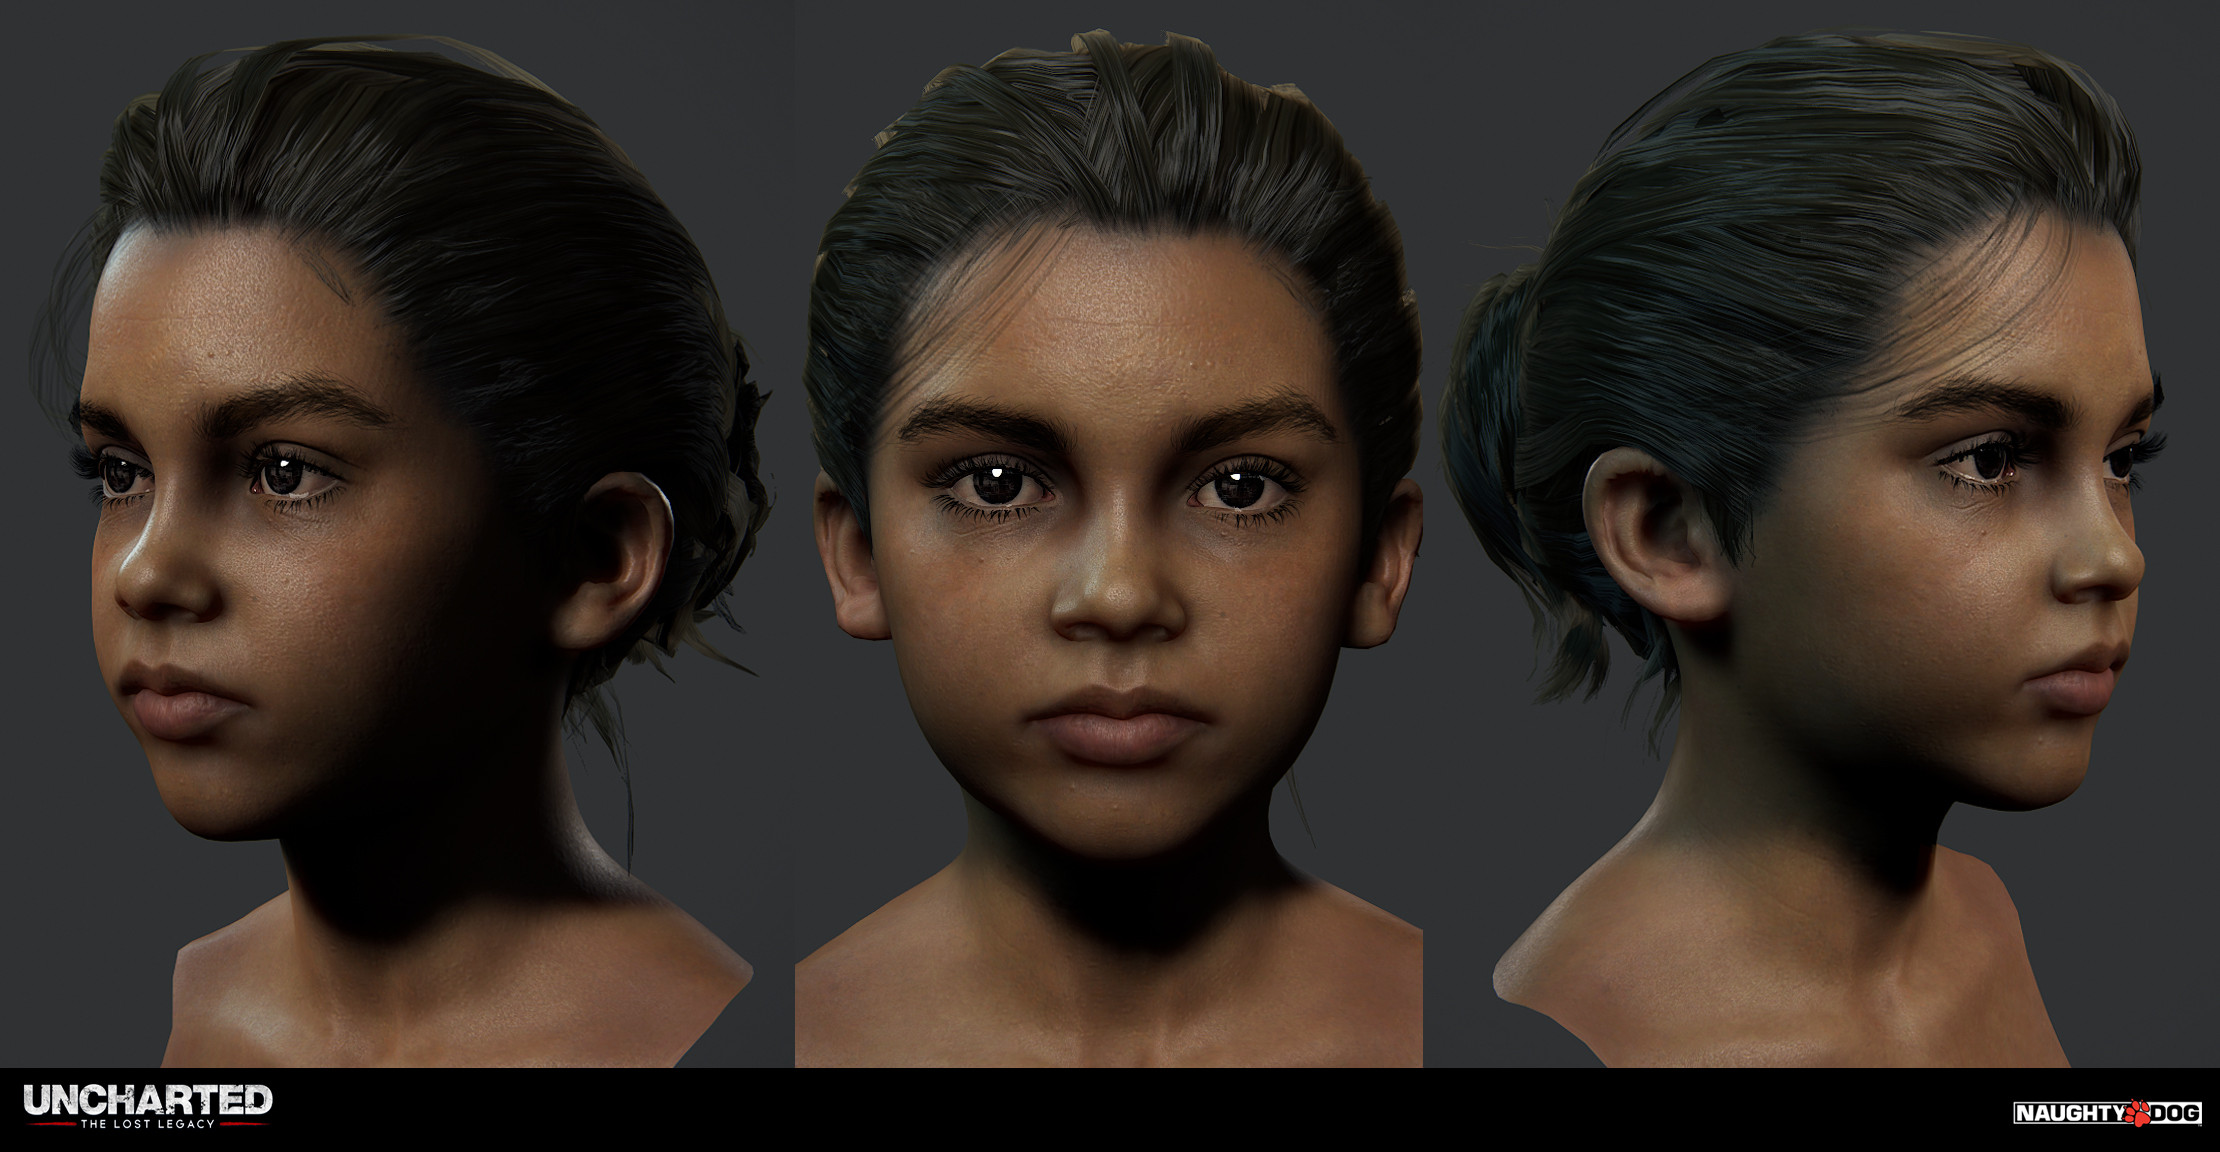 Npc kid head: head from scratch. Hair started from an existent archive and reworked for this character.